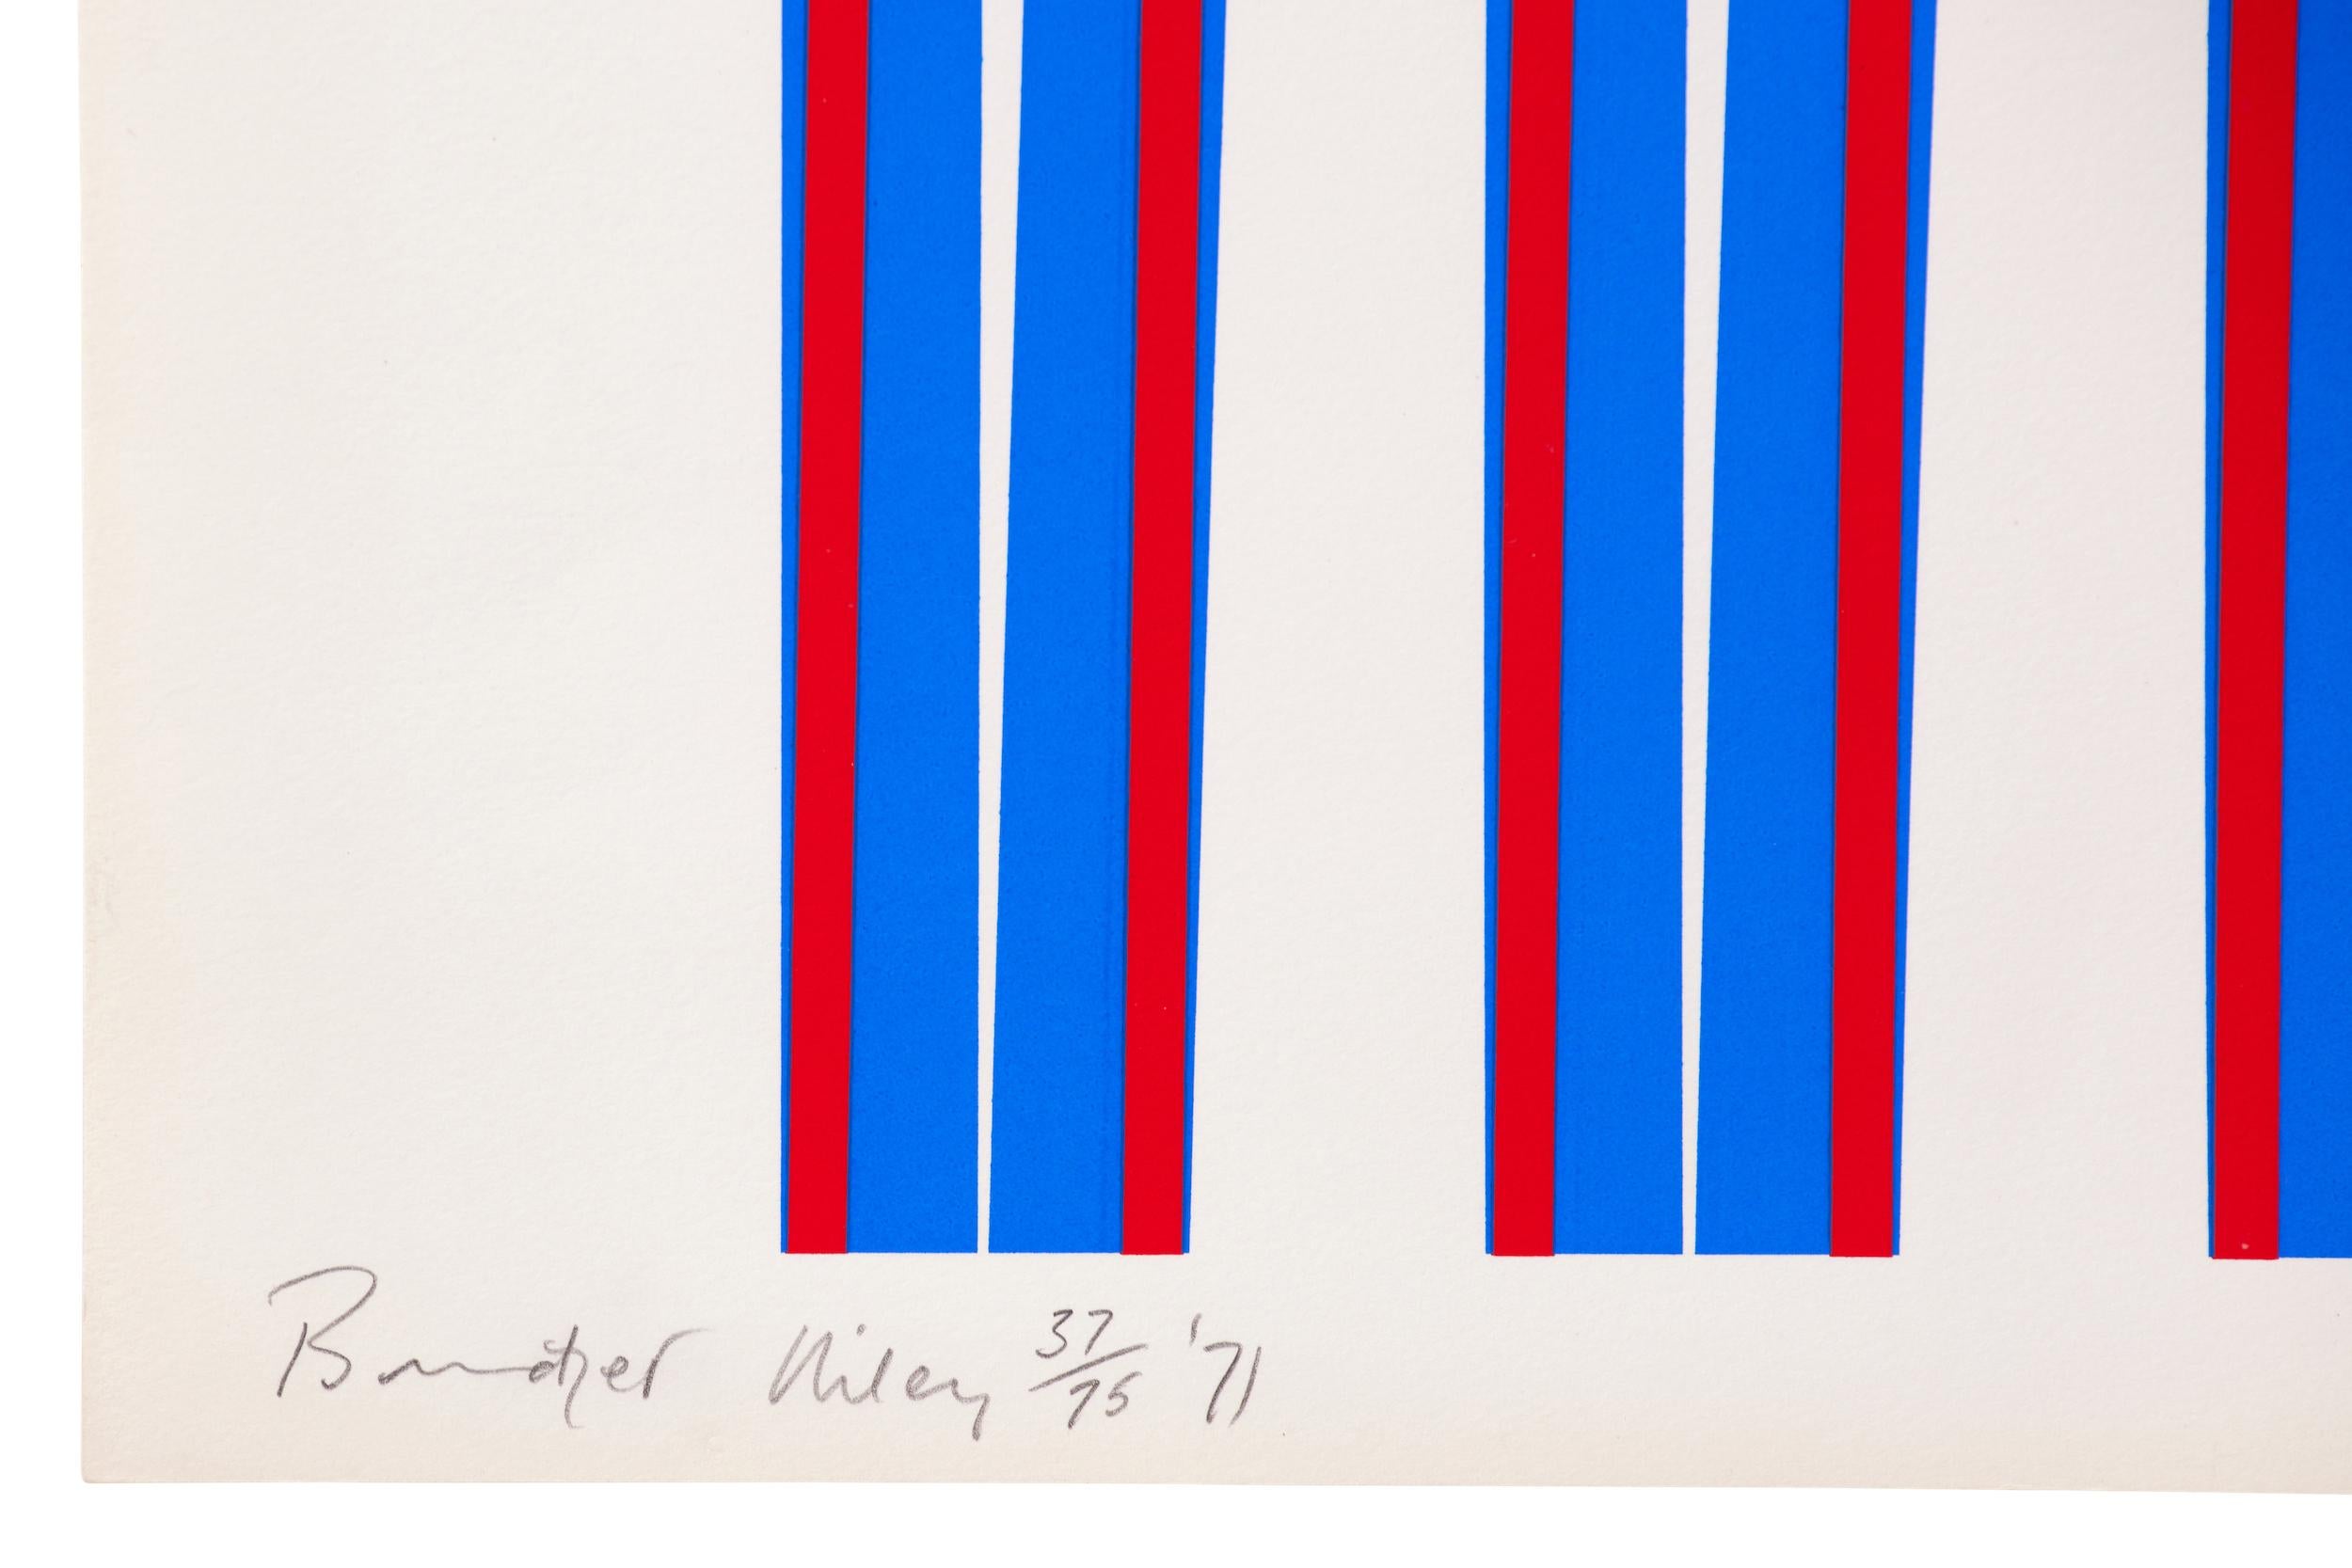 Untitled [Elongated Triangles 1], 1971
Bridget Riley

Screenprint in colours, on wove
Signed, dated and numbered from the edition of 75
Printed by Kelpra Studio, London
Image: 97 × 27.4 cm (38.2 × 10.8 in)
Sheet: 102.1 × 42.5 cm (40.1 × 16.7